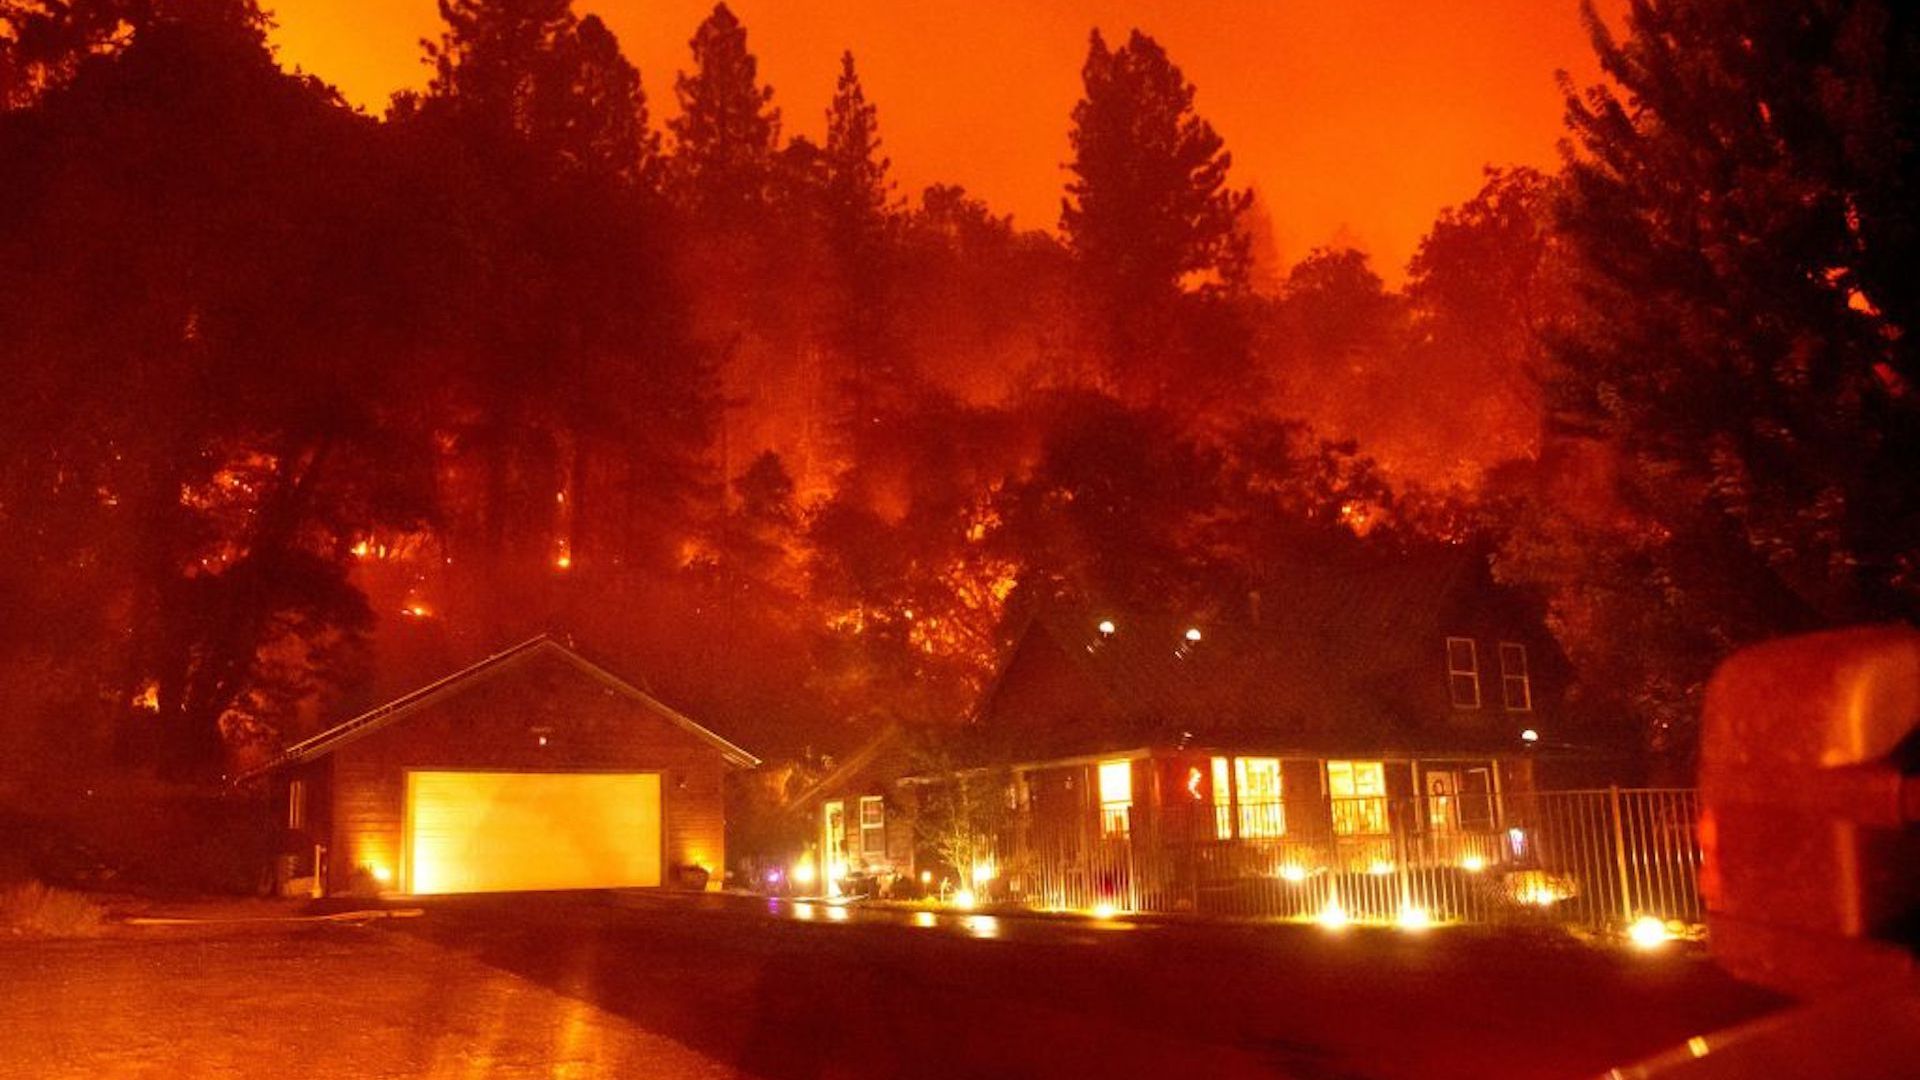 A home that survived the Mosquito fire is seen surrounded by flames and smoke in Foresthill, California on September 13, 2022